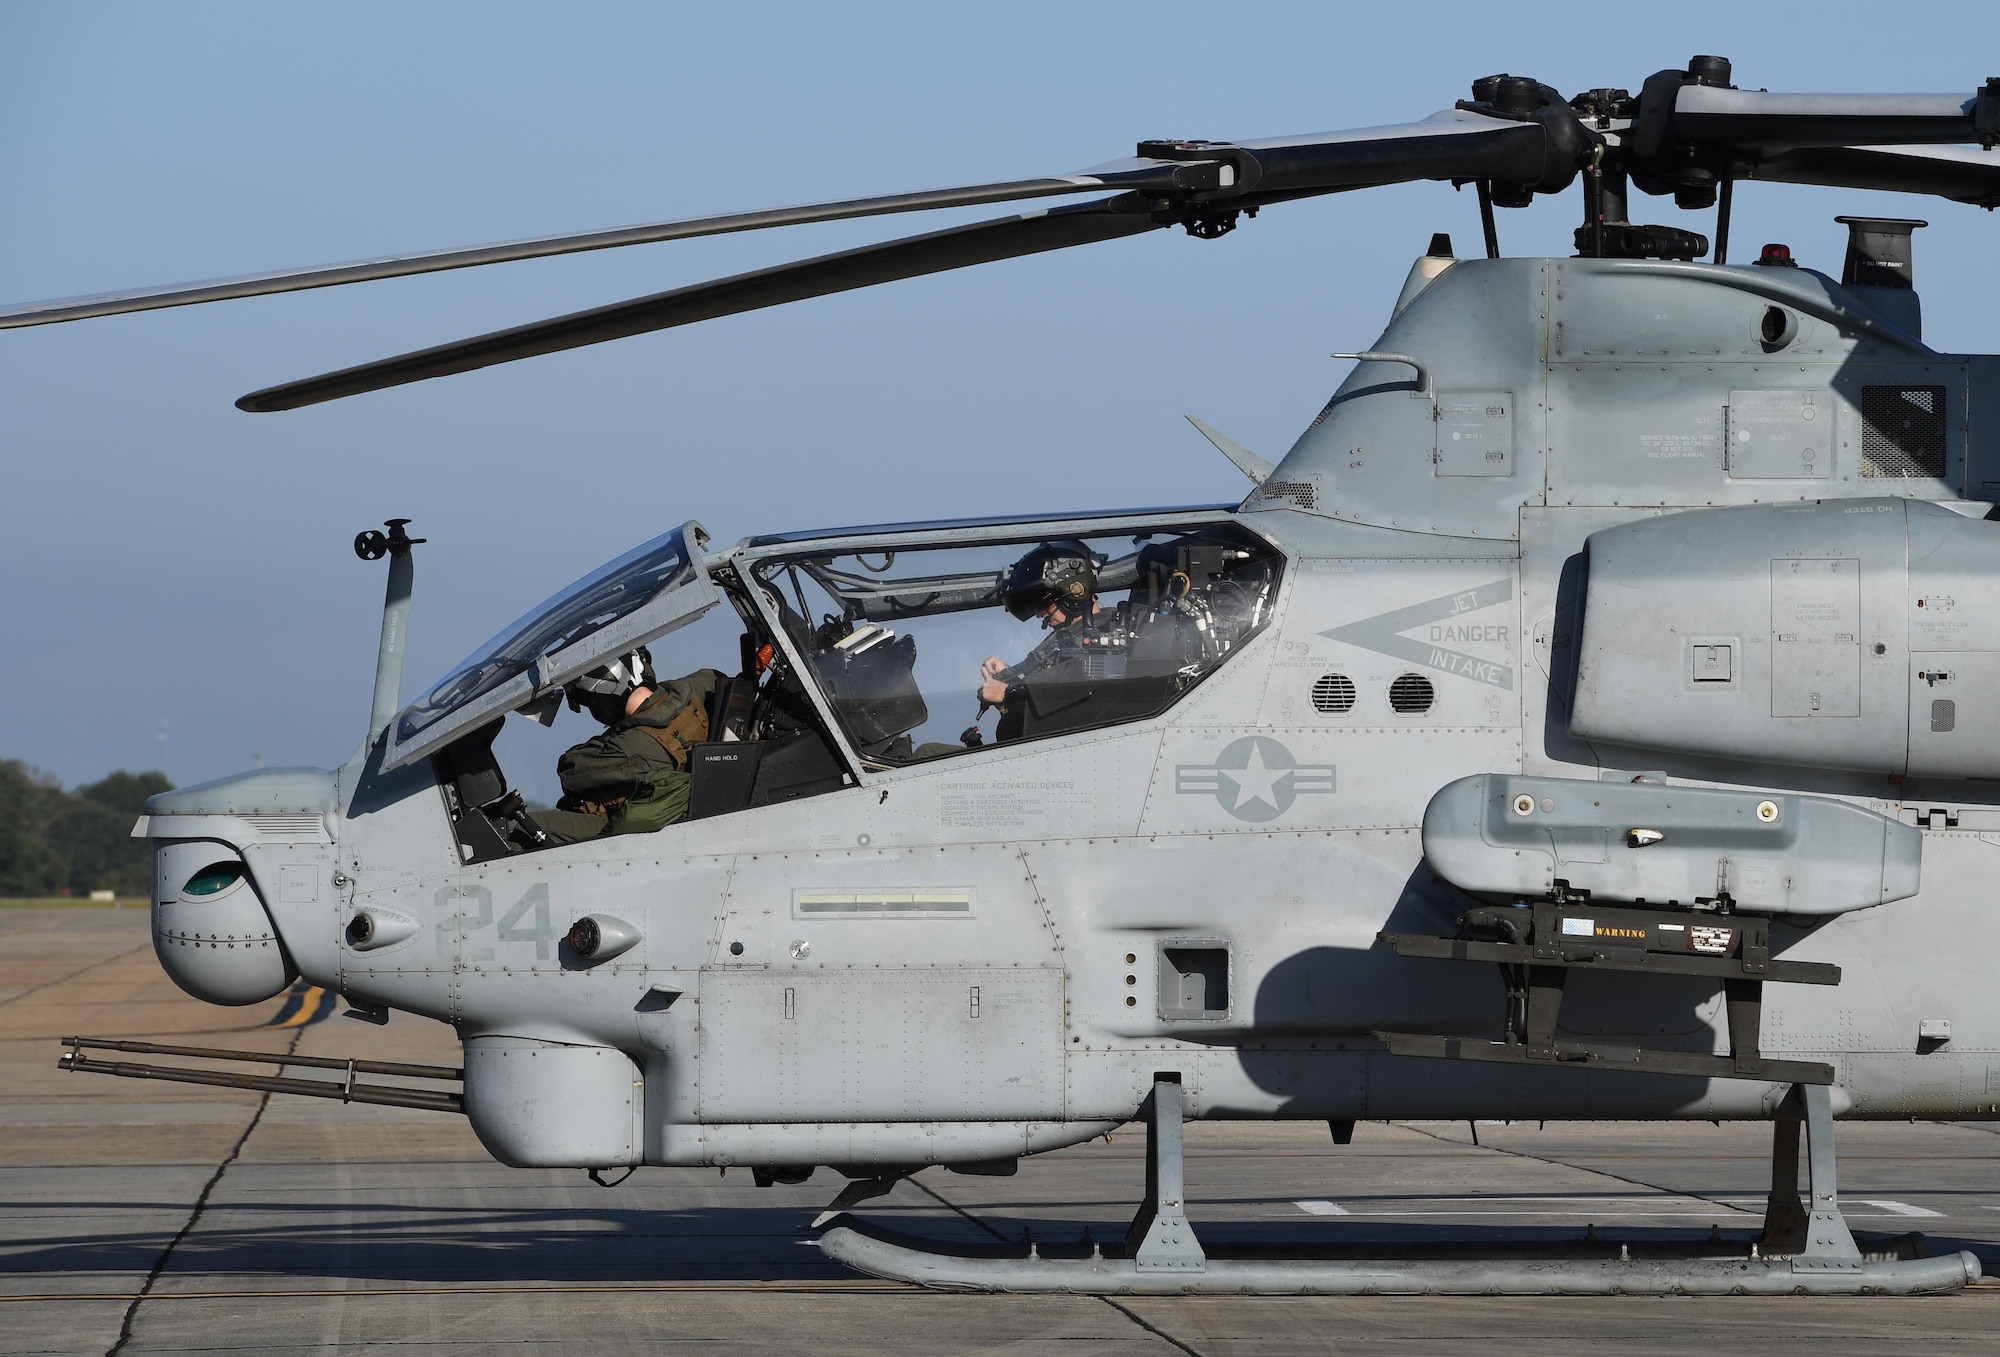 U.S. Marine Corps Capts. Edward Ross and Jeffrey Jaeckel, Marine Light Attack Helicopter Squadron 167 AH-1Z Cobra pilots, Marine Corps Air Station New River, North Carolina, prepare to fly an AH-1Z Cobra at Keesler Air Force Base, Mississippi, Oct. 21, 2020. Two AH-1Z Cobras and two UH-1Y Hueys were at Keesler for joint training with the Marine Special Operations Command during their RAVEN exercise from Oct. 12-21. RAVEN is the exercise Marine Raiders complete after their six-month training cycle in preparation for deployment to ensure operational readiness of the Marine Special Operations Teams. (U.S. Air Force photo by Kemberly Groue)